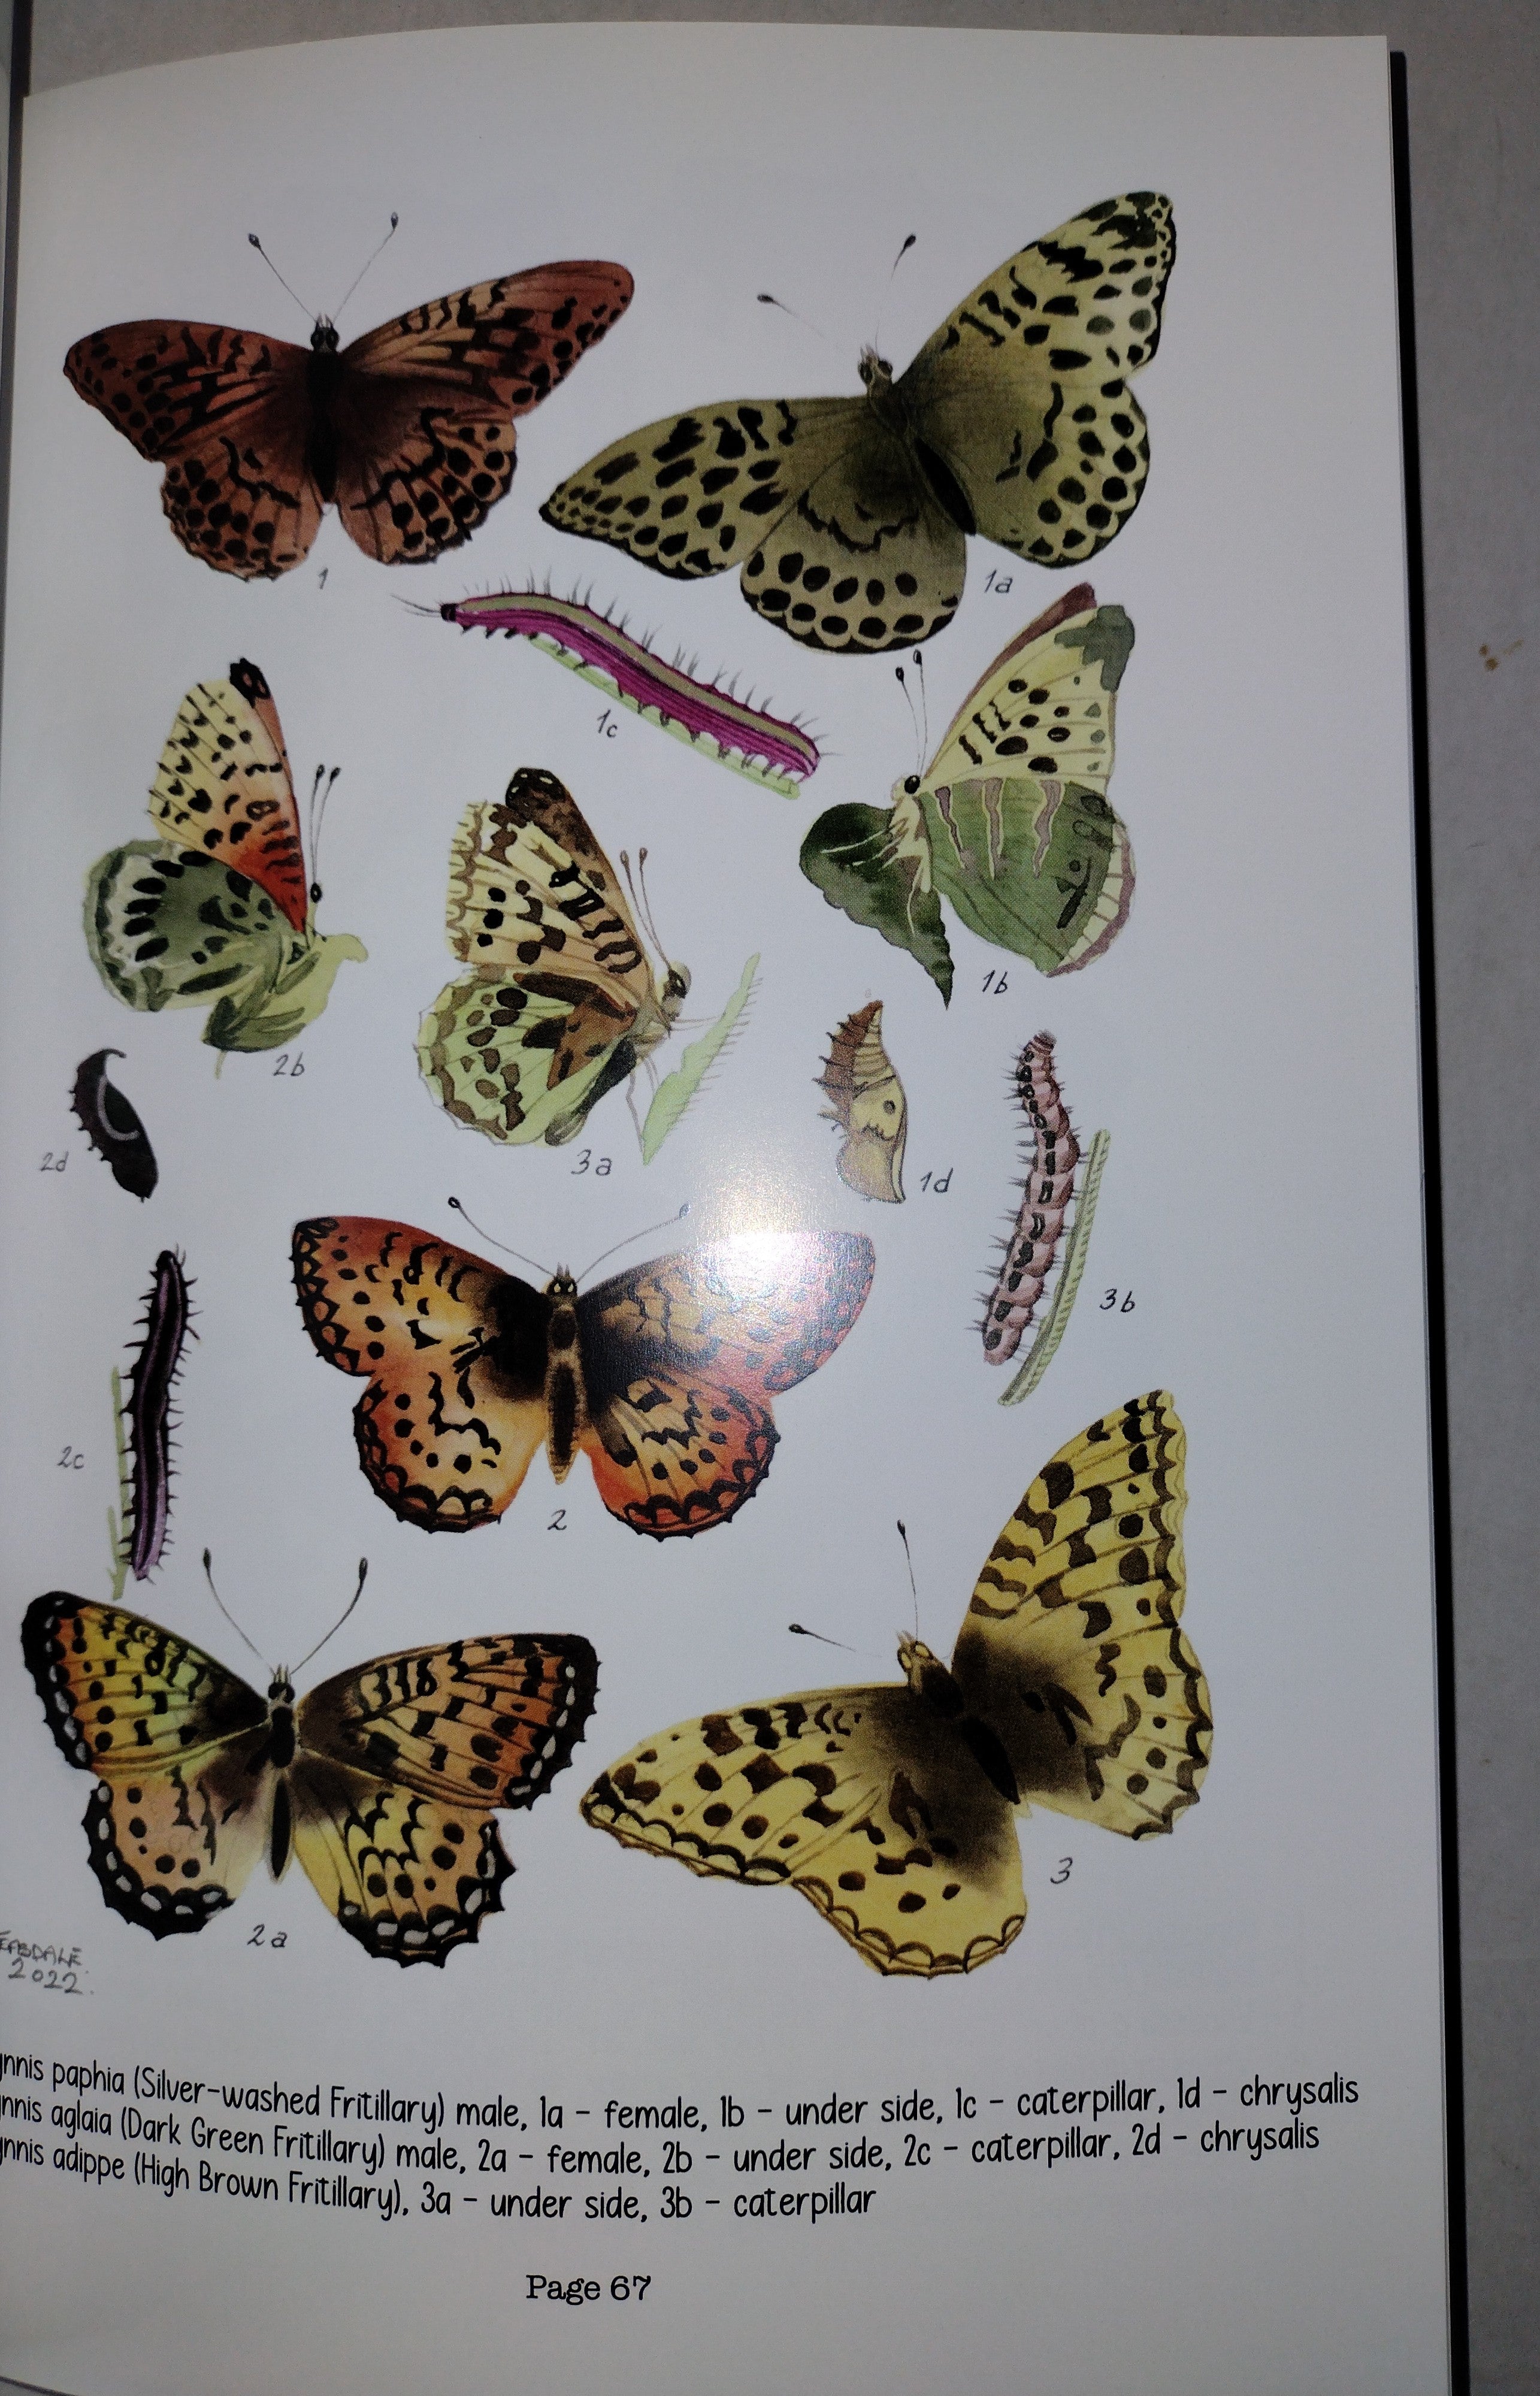 Butterfly and Moth Collecting by G E J Teasdale